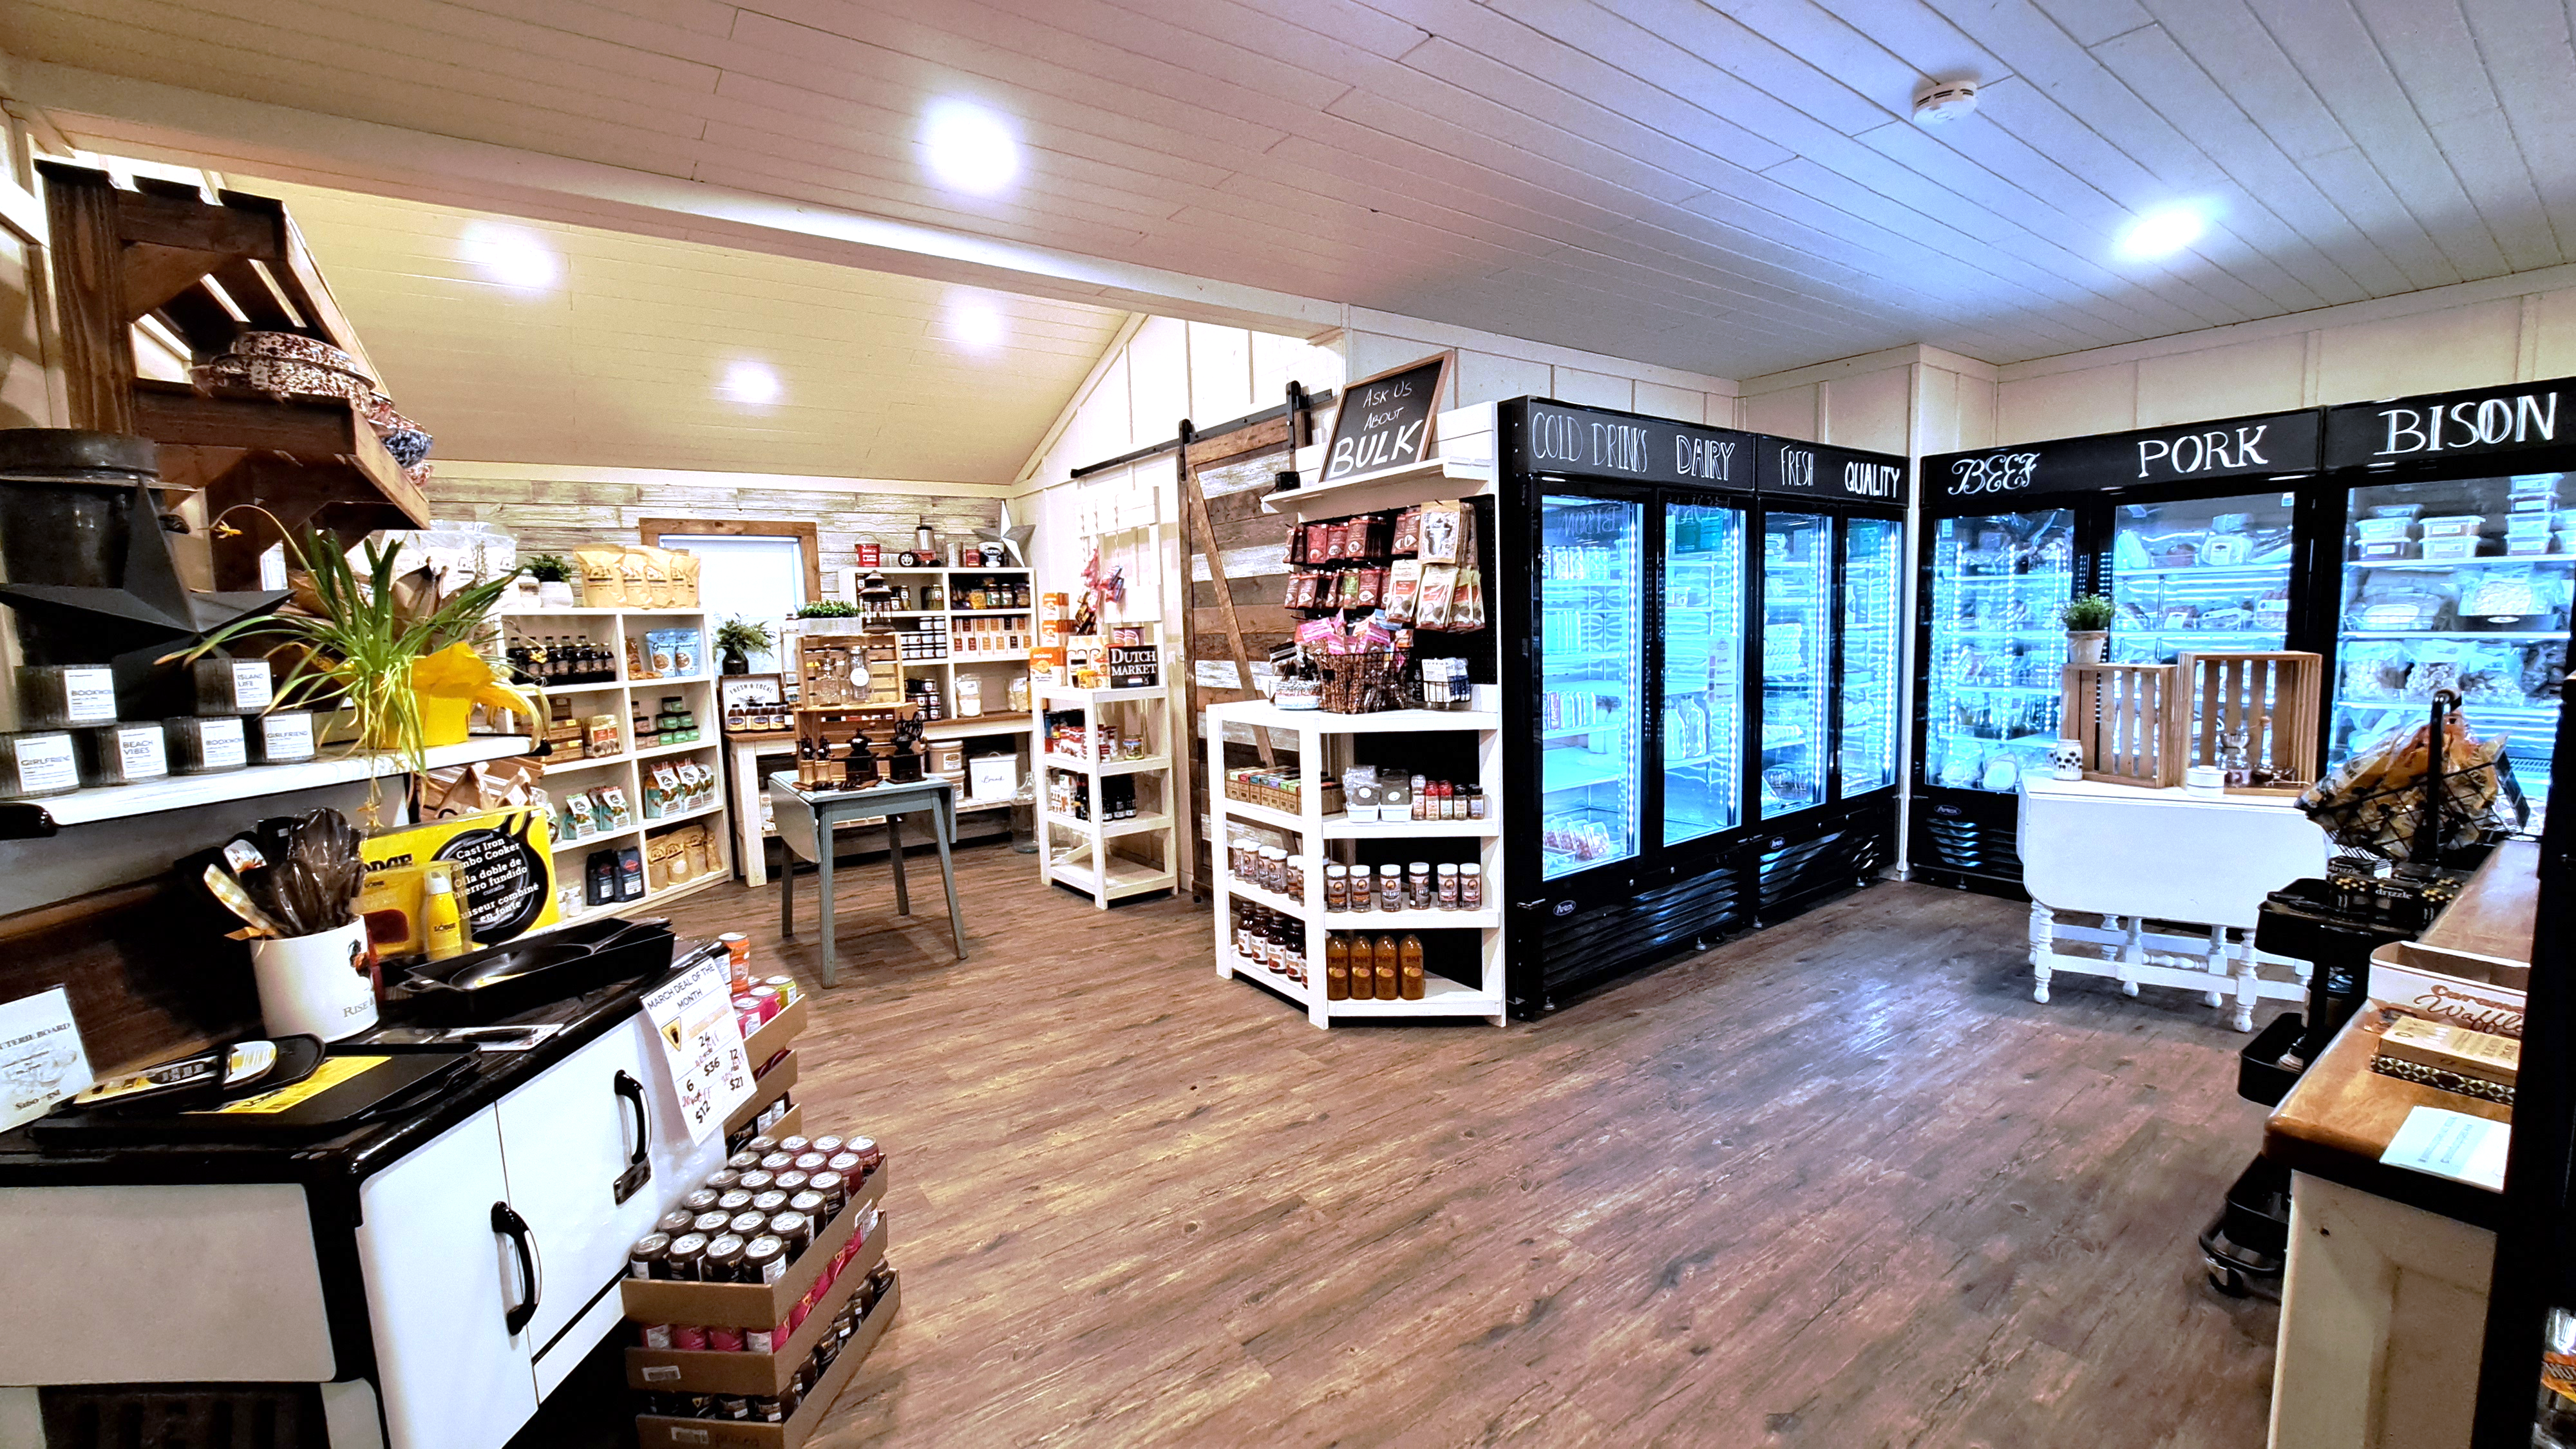 Alberta grown local products including fresh veggies, dairy, meat, ice cream and more!